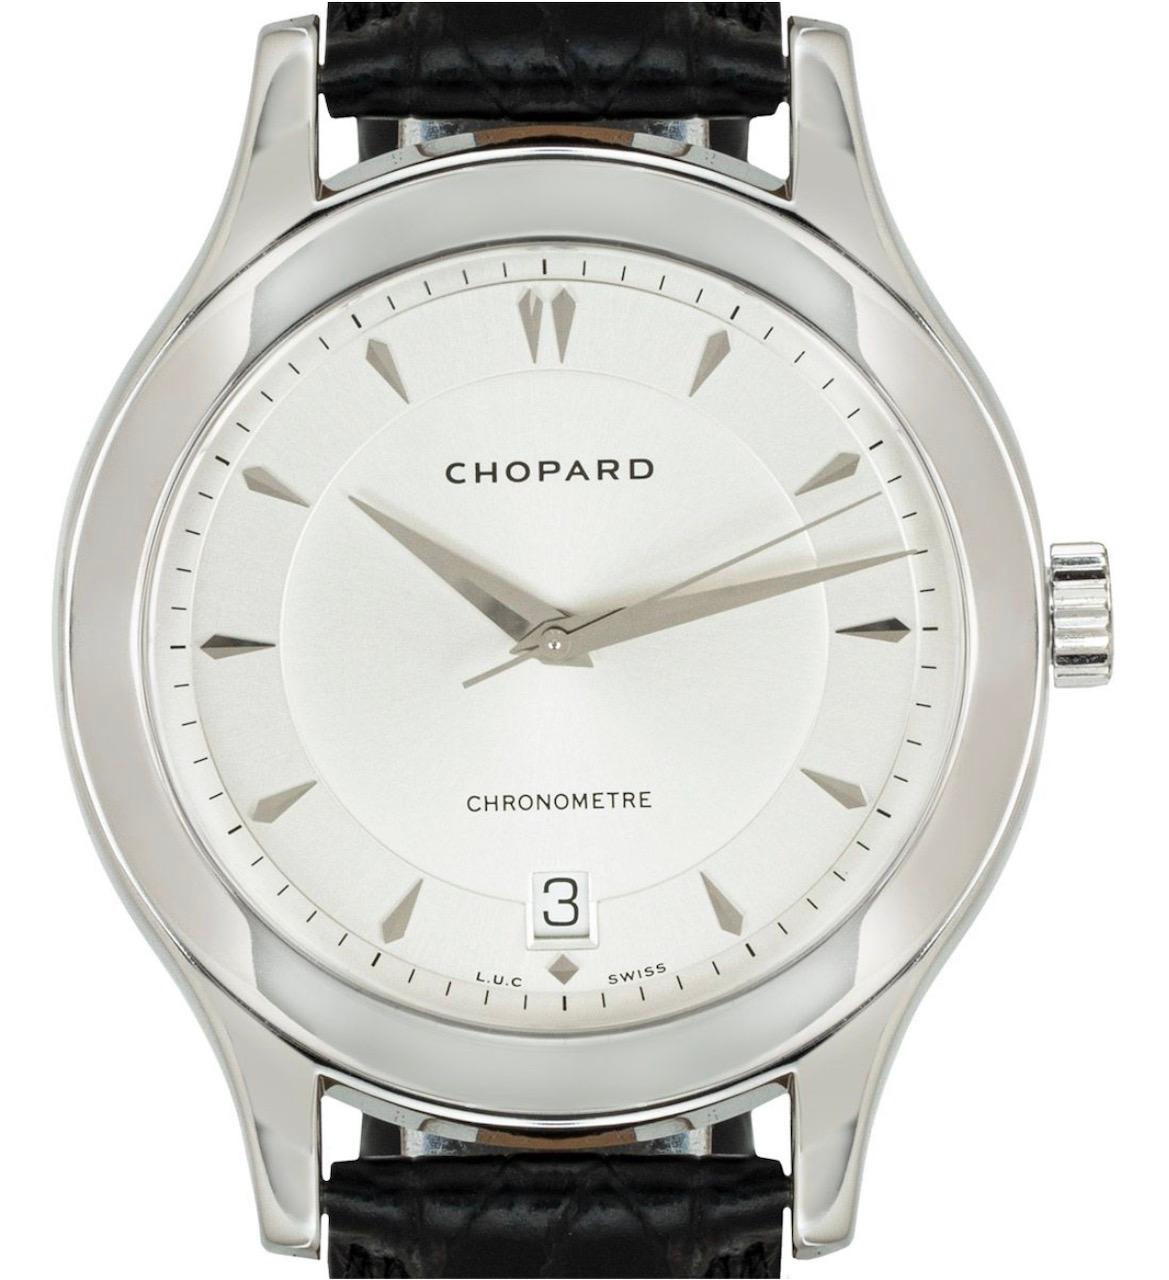 A white gold L.U.C wristwatch by Chopard. Features a silver dial with applied hour markers, a date aperture and a white gold bezel. Fitted with sapphire glass, a self-winding automatic movement which can be seen via the exhibition case back and a